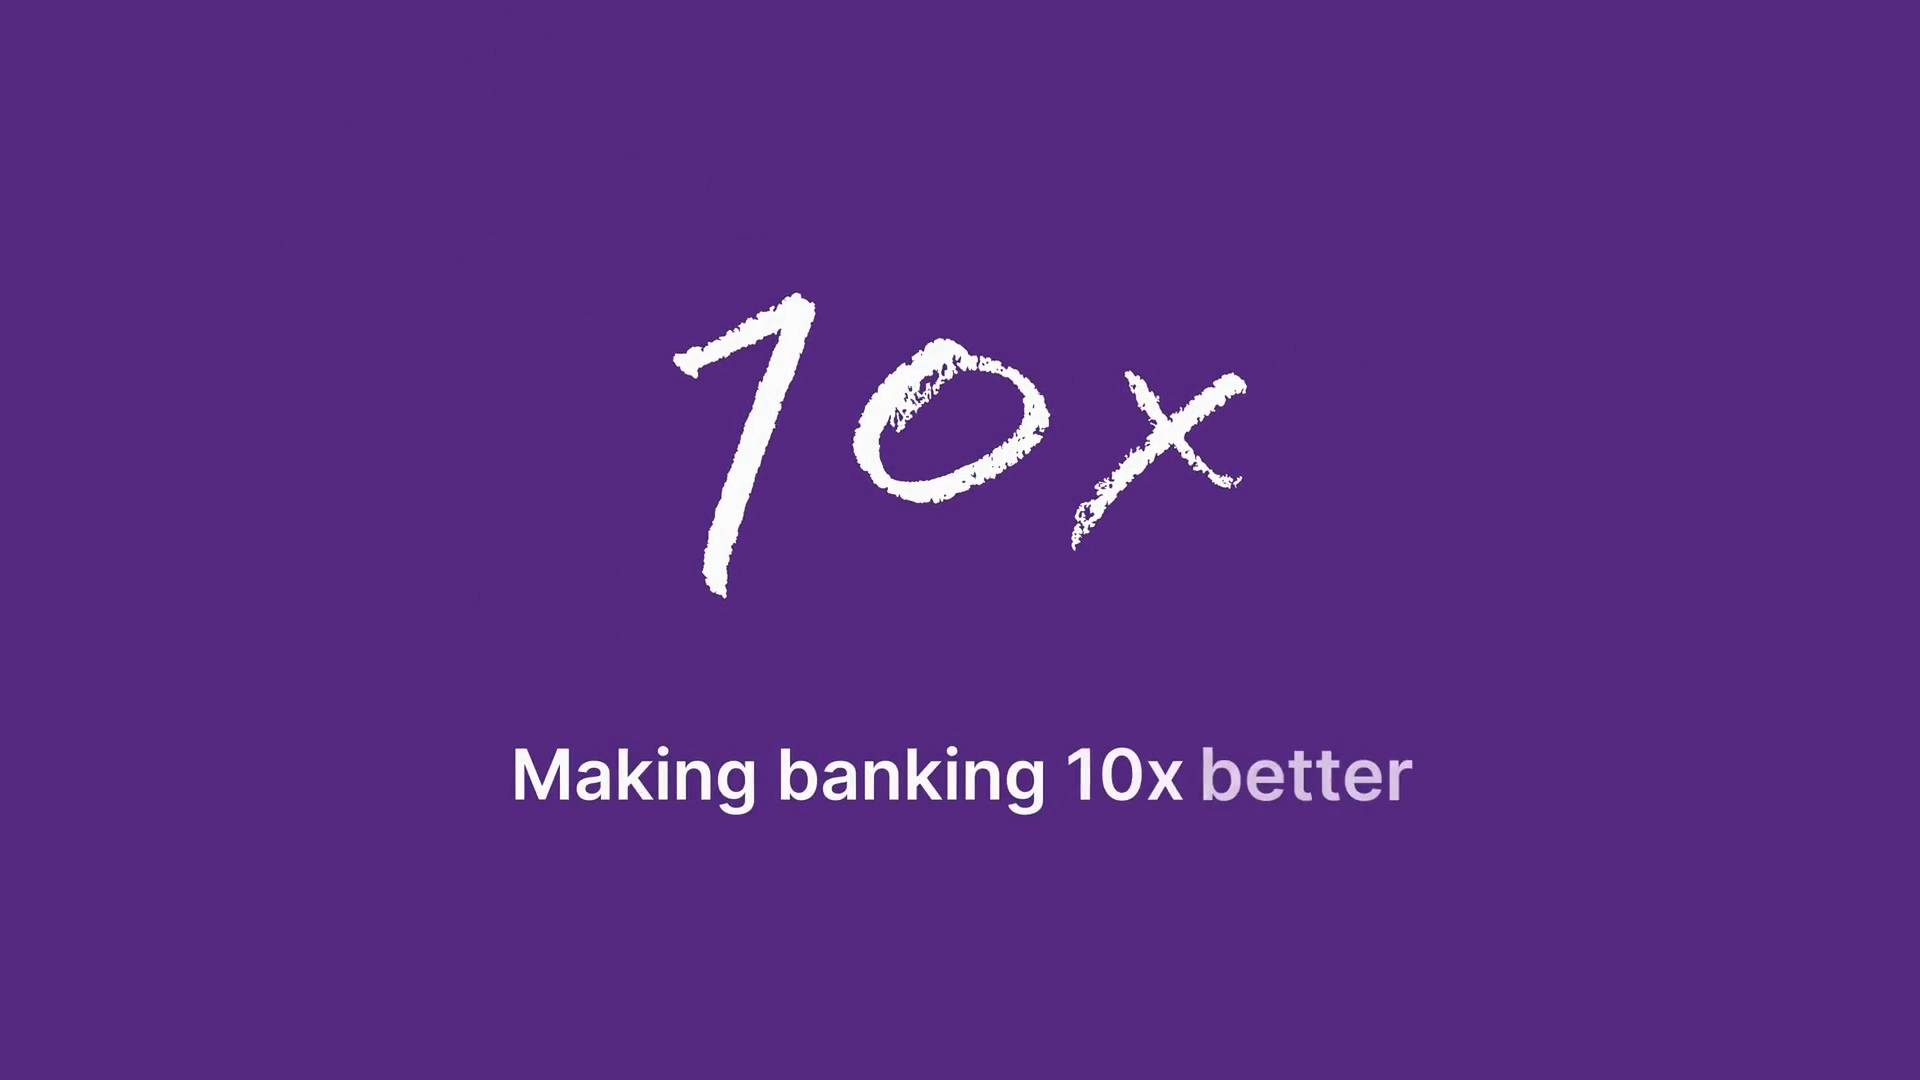 10x Banking introduces the metacore - a new category of core banking technology